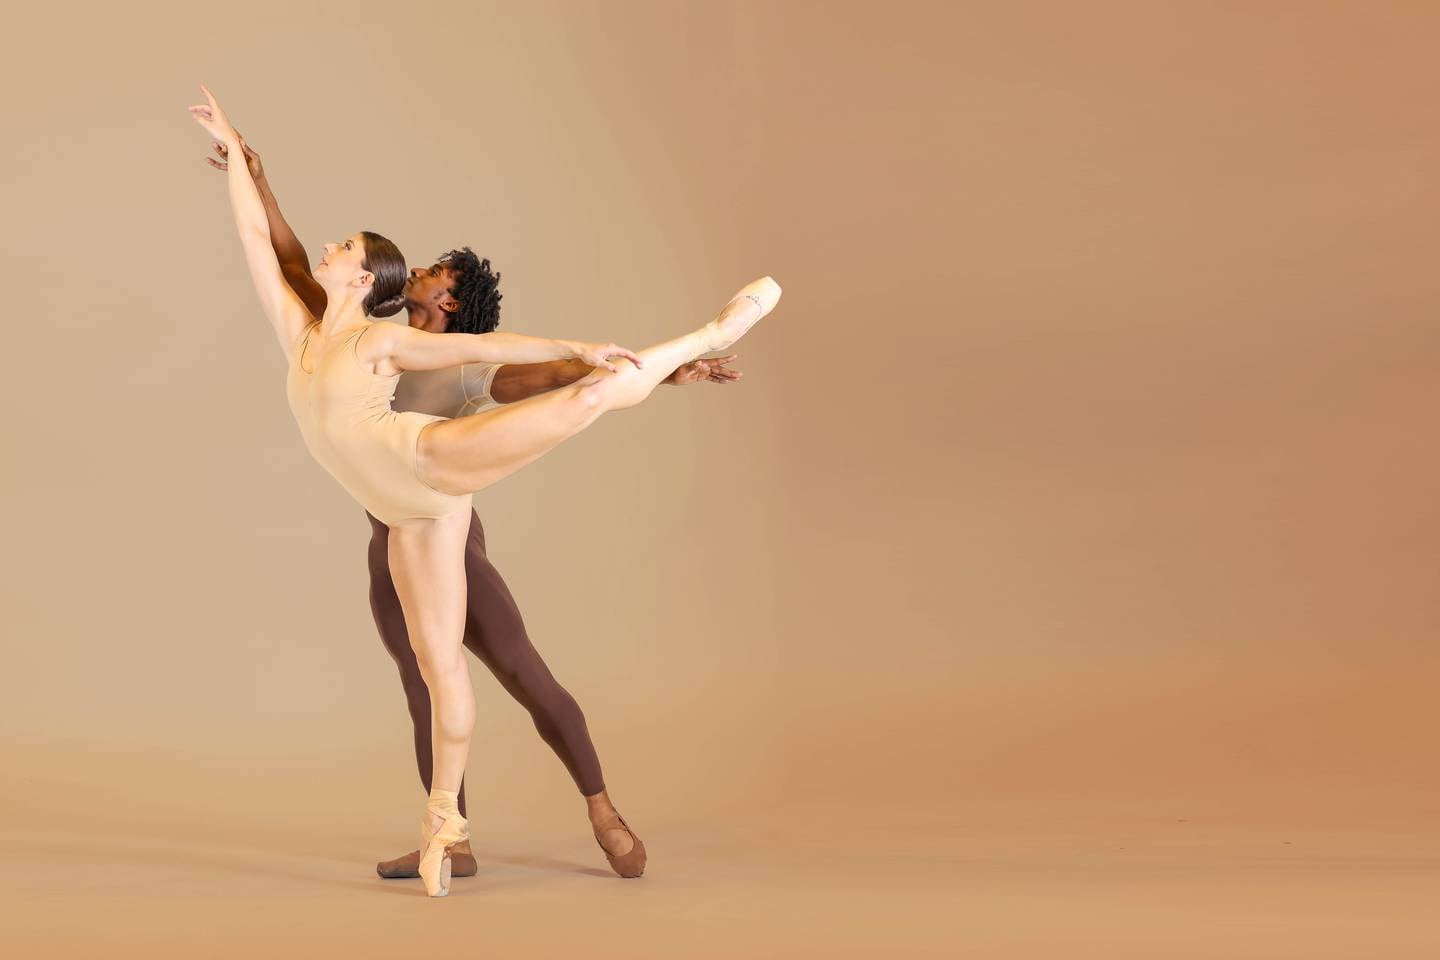 Ballet Theatre of Maryland premieres seven new works in “Momentum: A Mixed Bill” at Maryland Hall, giving audiences a taste of diverse neoclassical and contemporary movement styles.